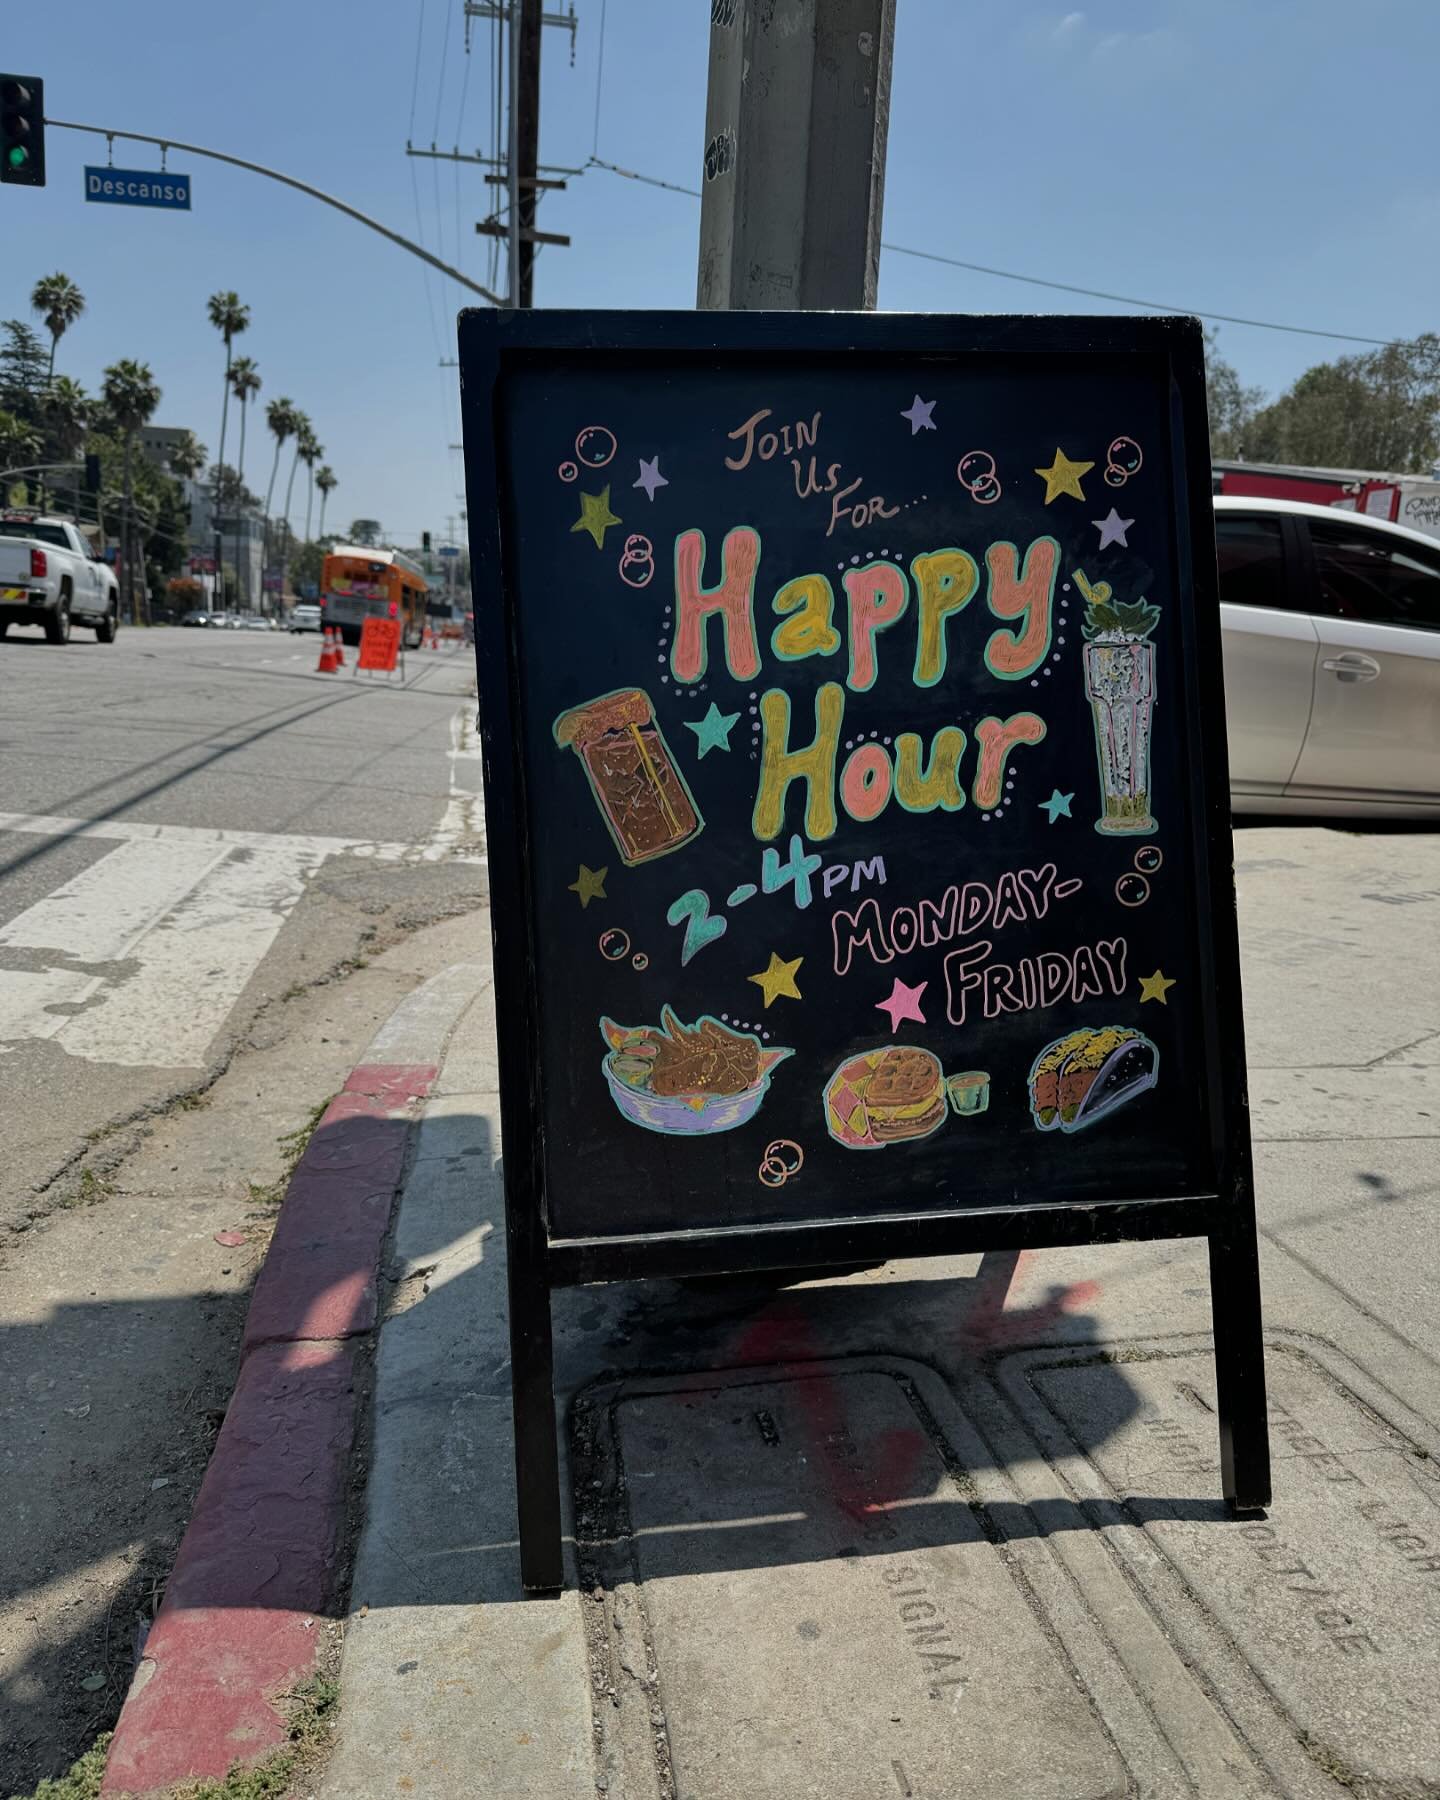 send a calendar invite to someone 😚 2-4PM HAPPY HOUR (every weekday!)

sandwich board artistry by the brilliant @trillian_ 🤩🤩🤩🤩 I mean look at that waffle sandwich and HH-only mojito with the mint boba pearls!